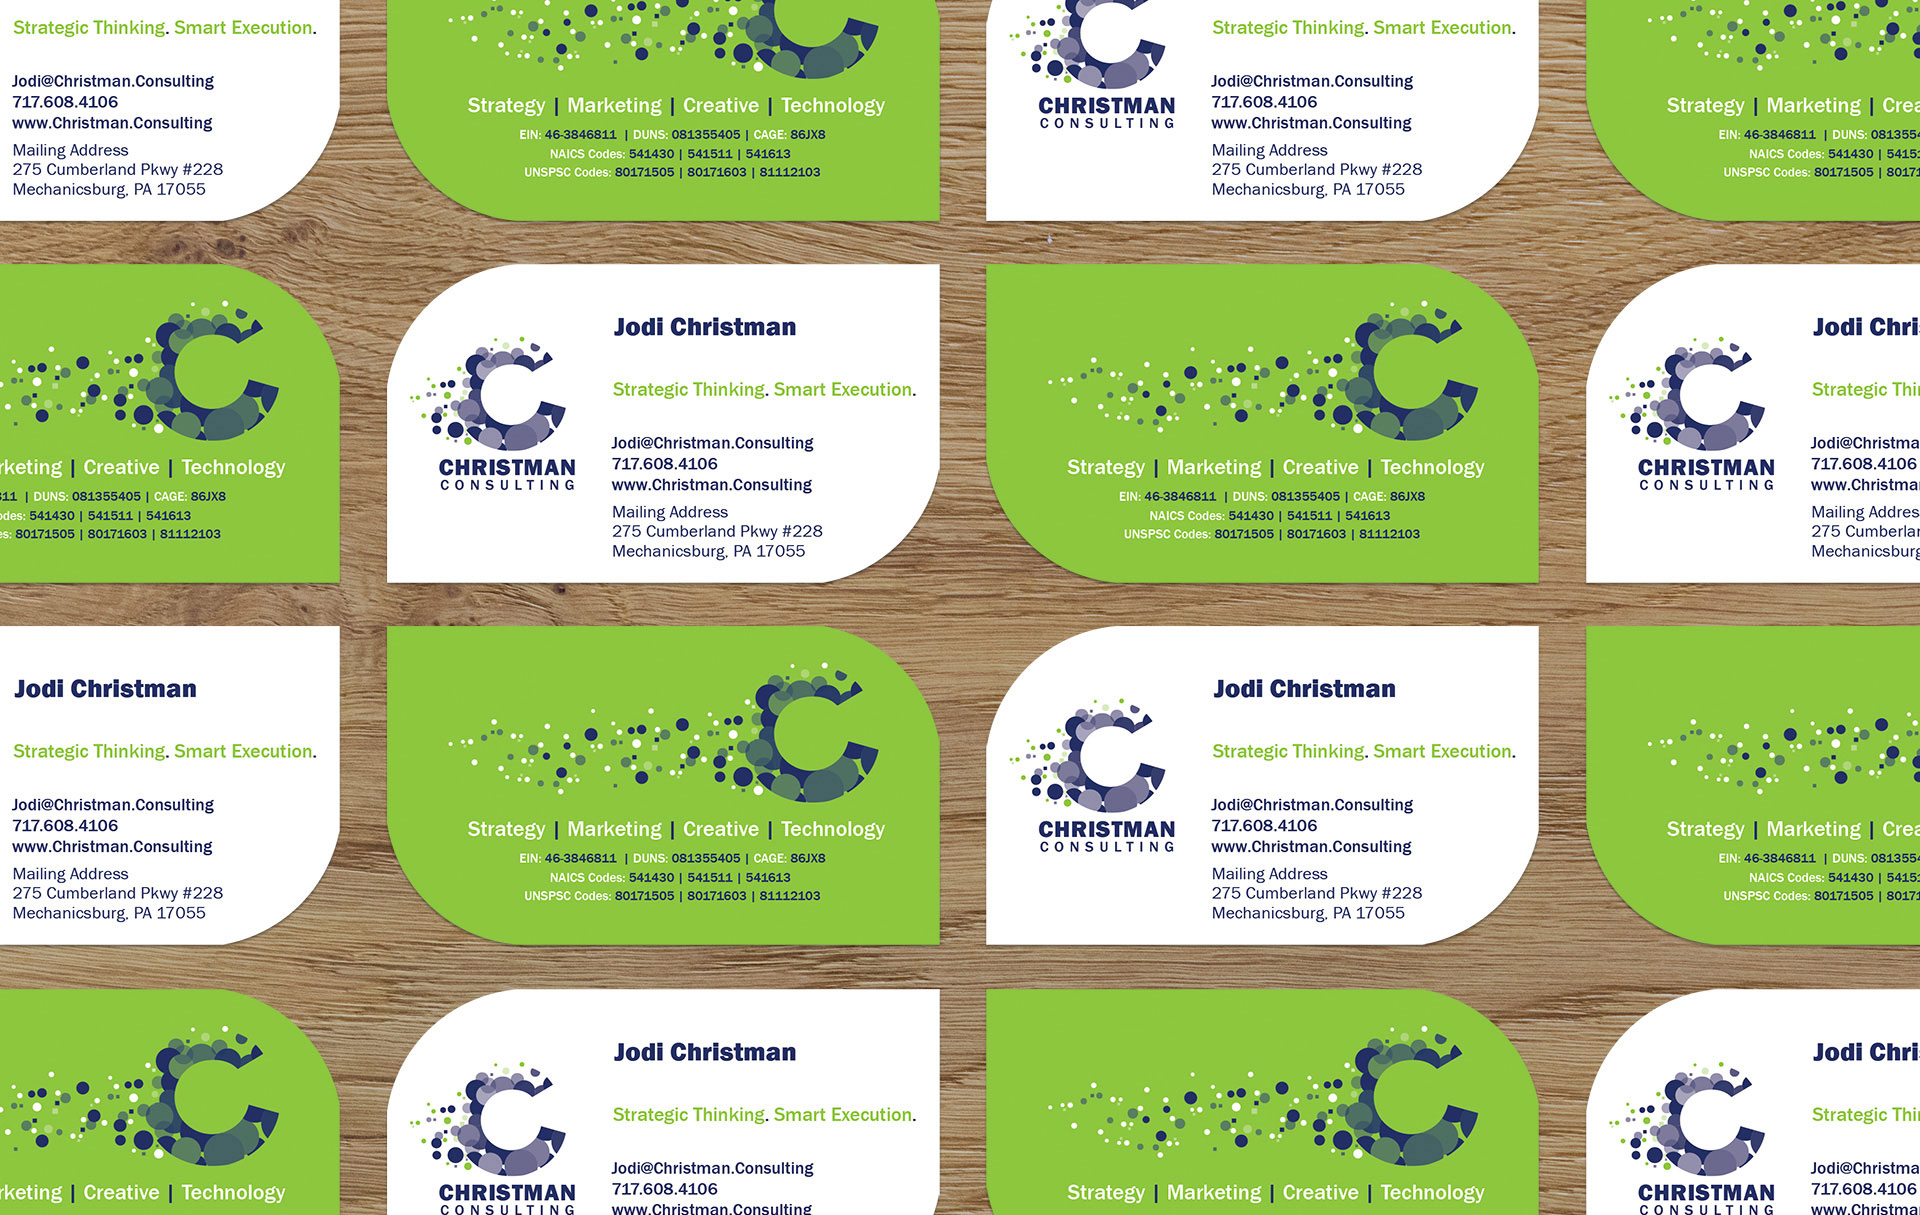 ChristmanConsulting-BusinessCards